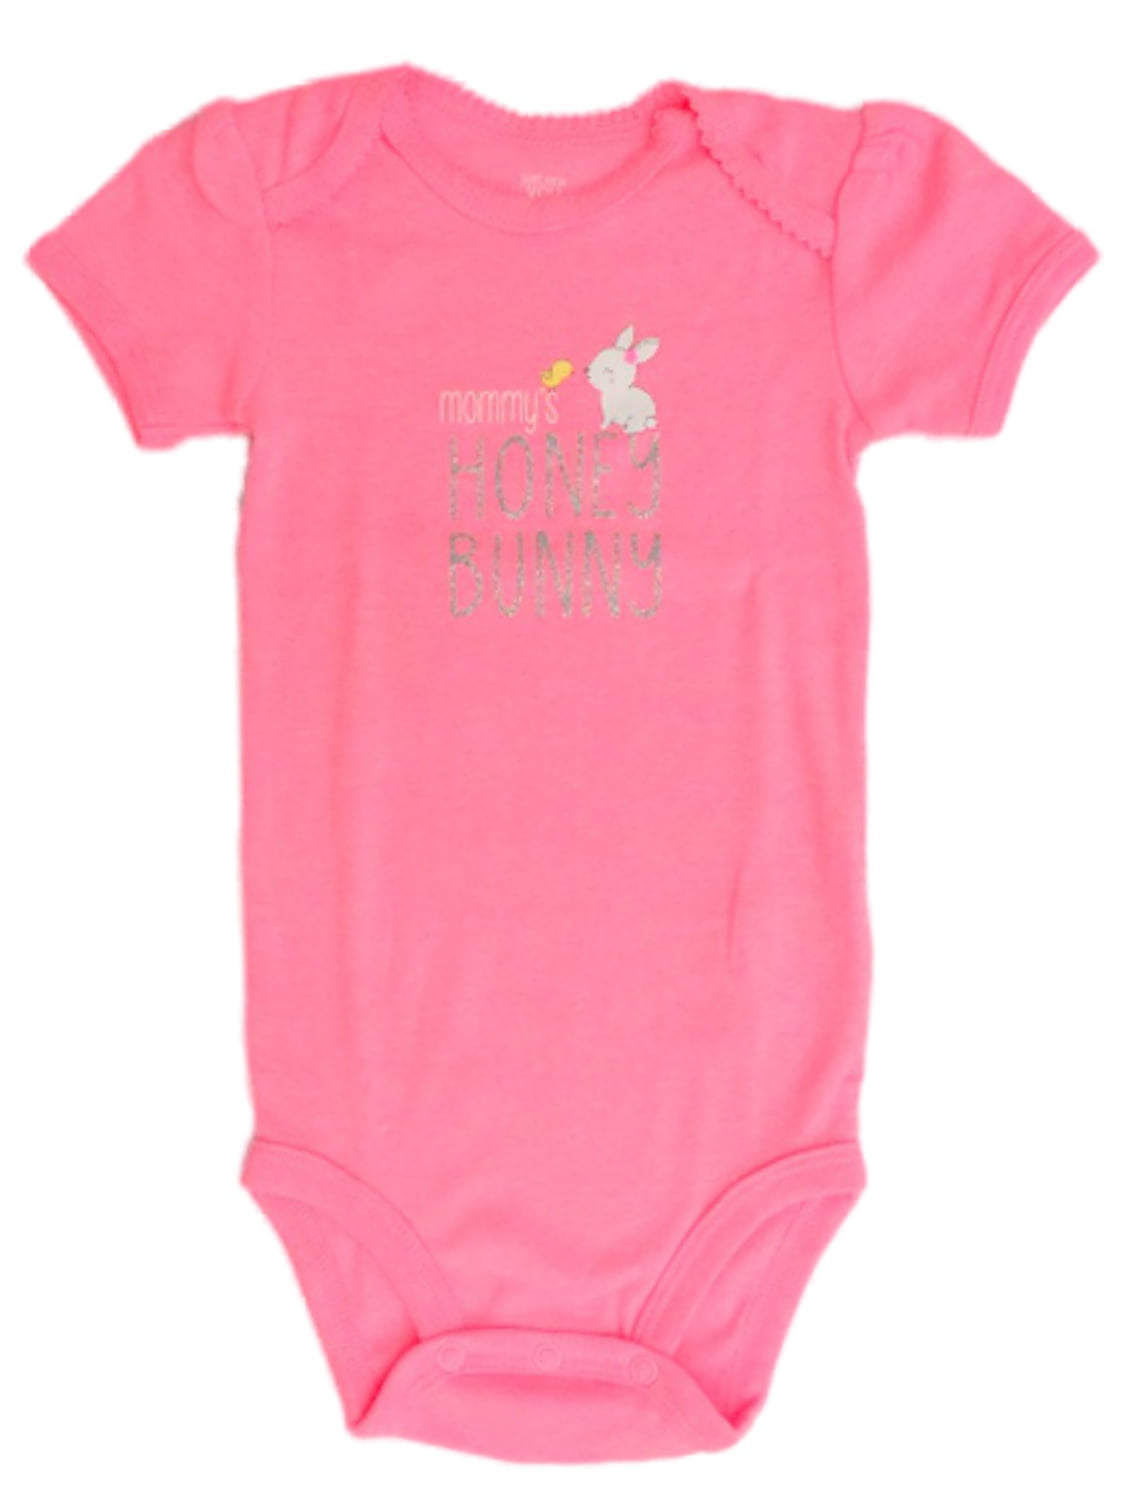 Carter's Infant Girls Pink Mommy's Honey Bunny Easter Outfit Baby Rabbit Bodysuit Walmart